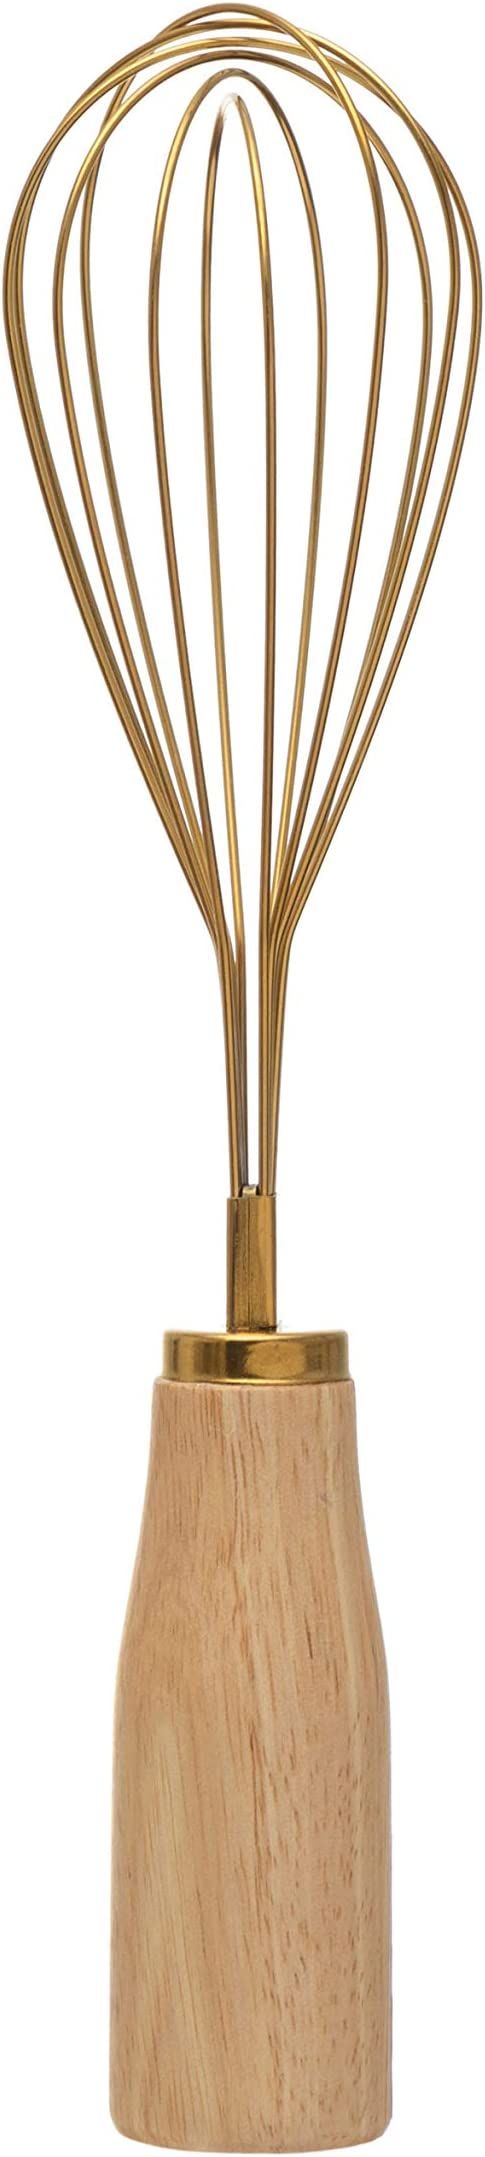 Bloomingville Standing Stainless Steel Wood Handle, Gold Finish Whisk, 10.25" | Amazon (US)